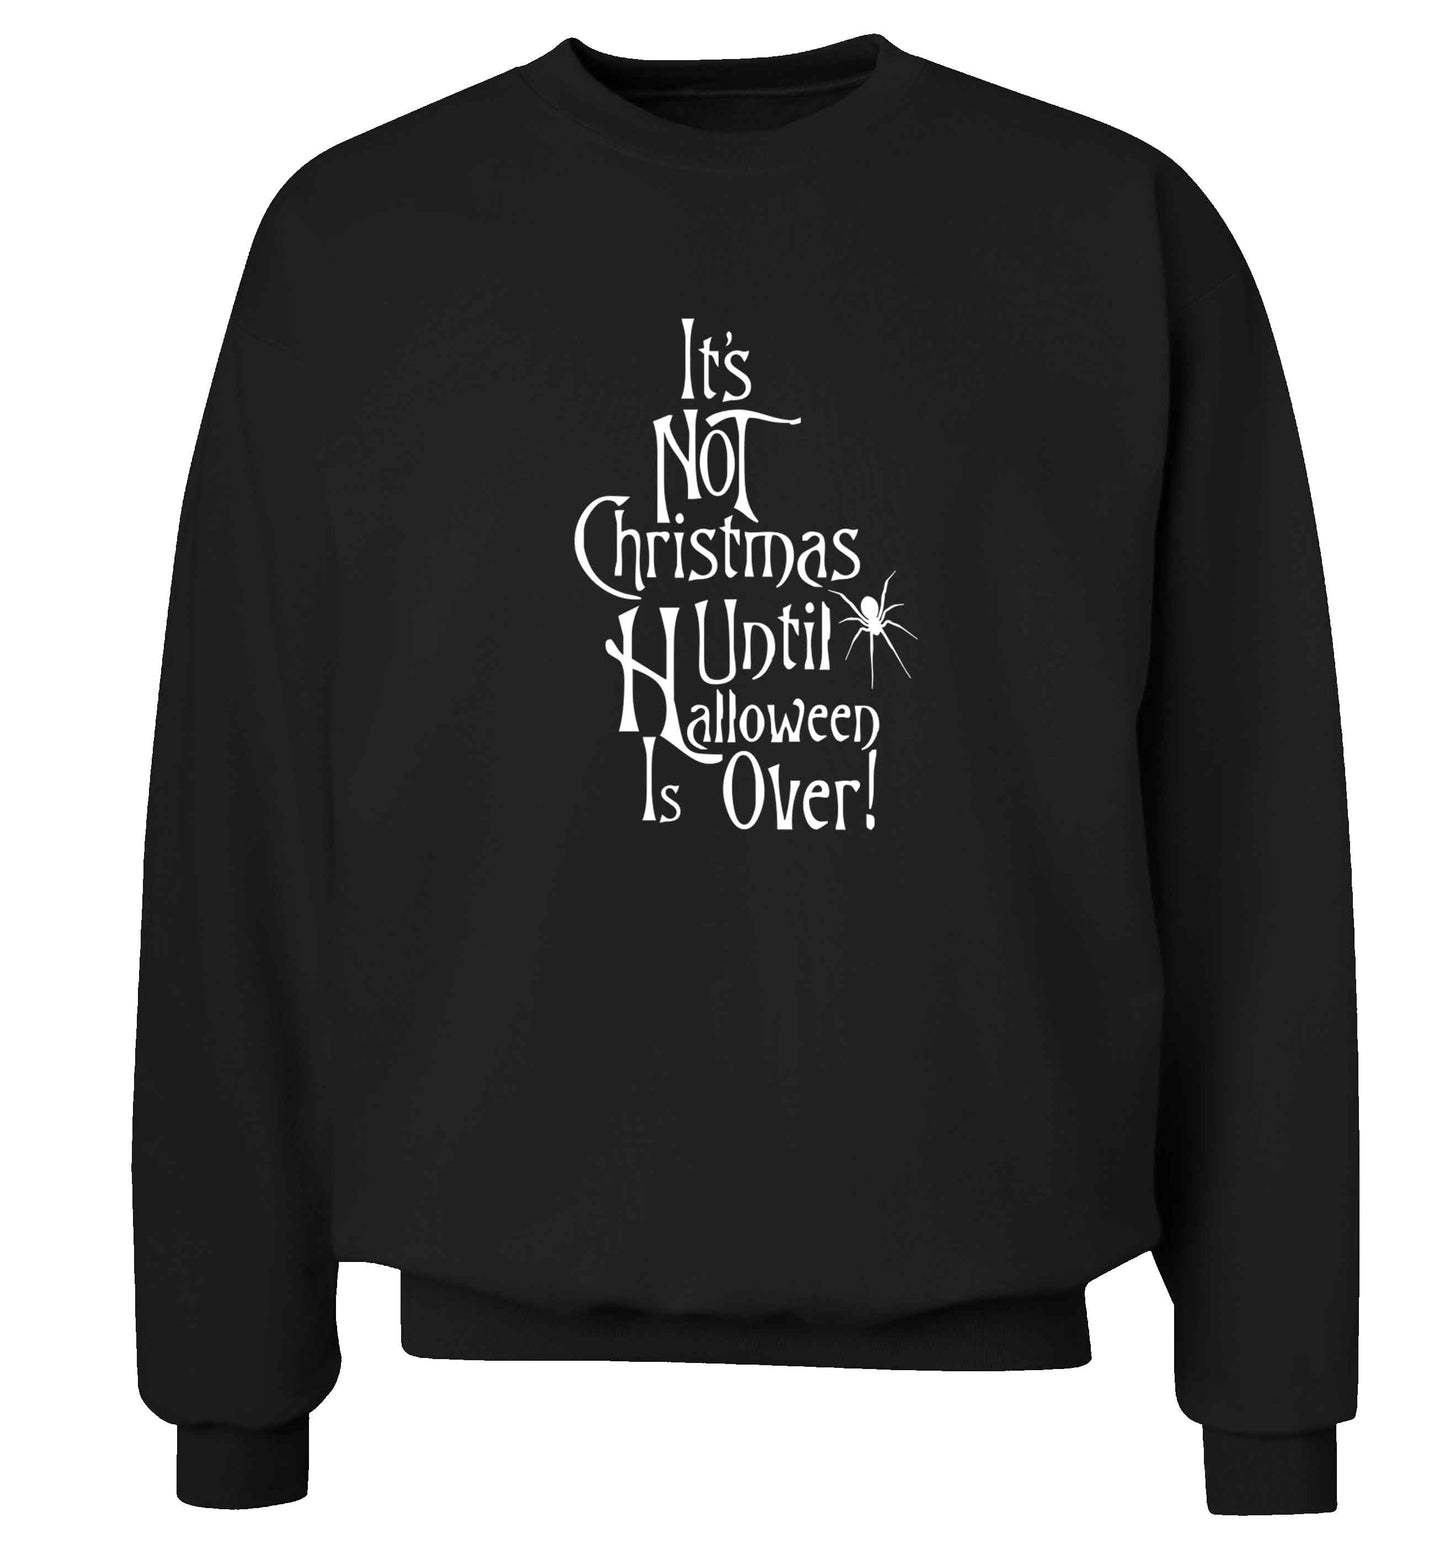 It's not Christmas until Halloween is over adult's unisex black sweater 2XL